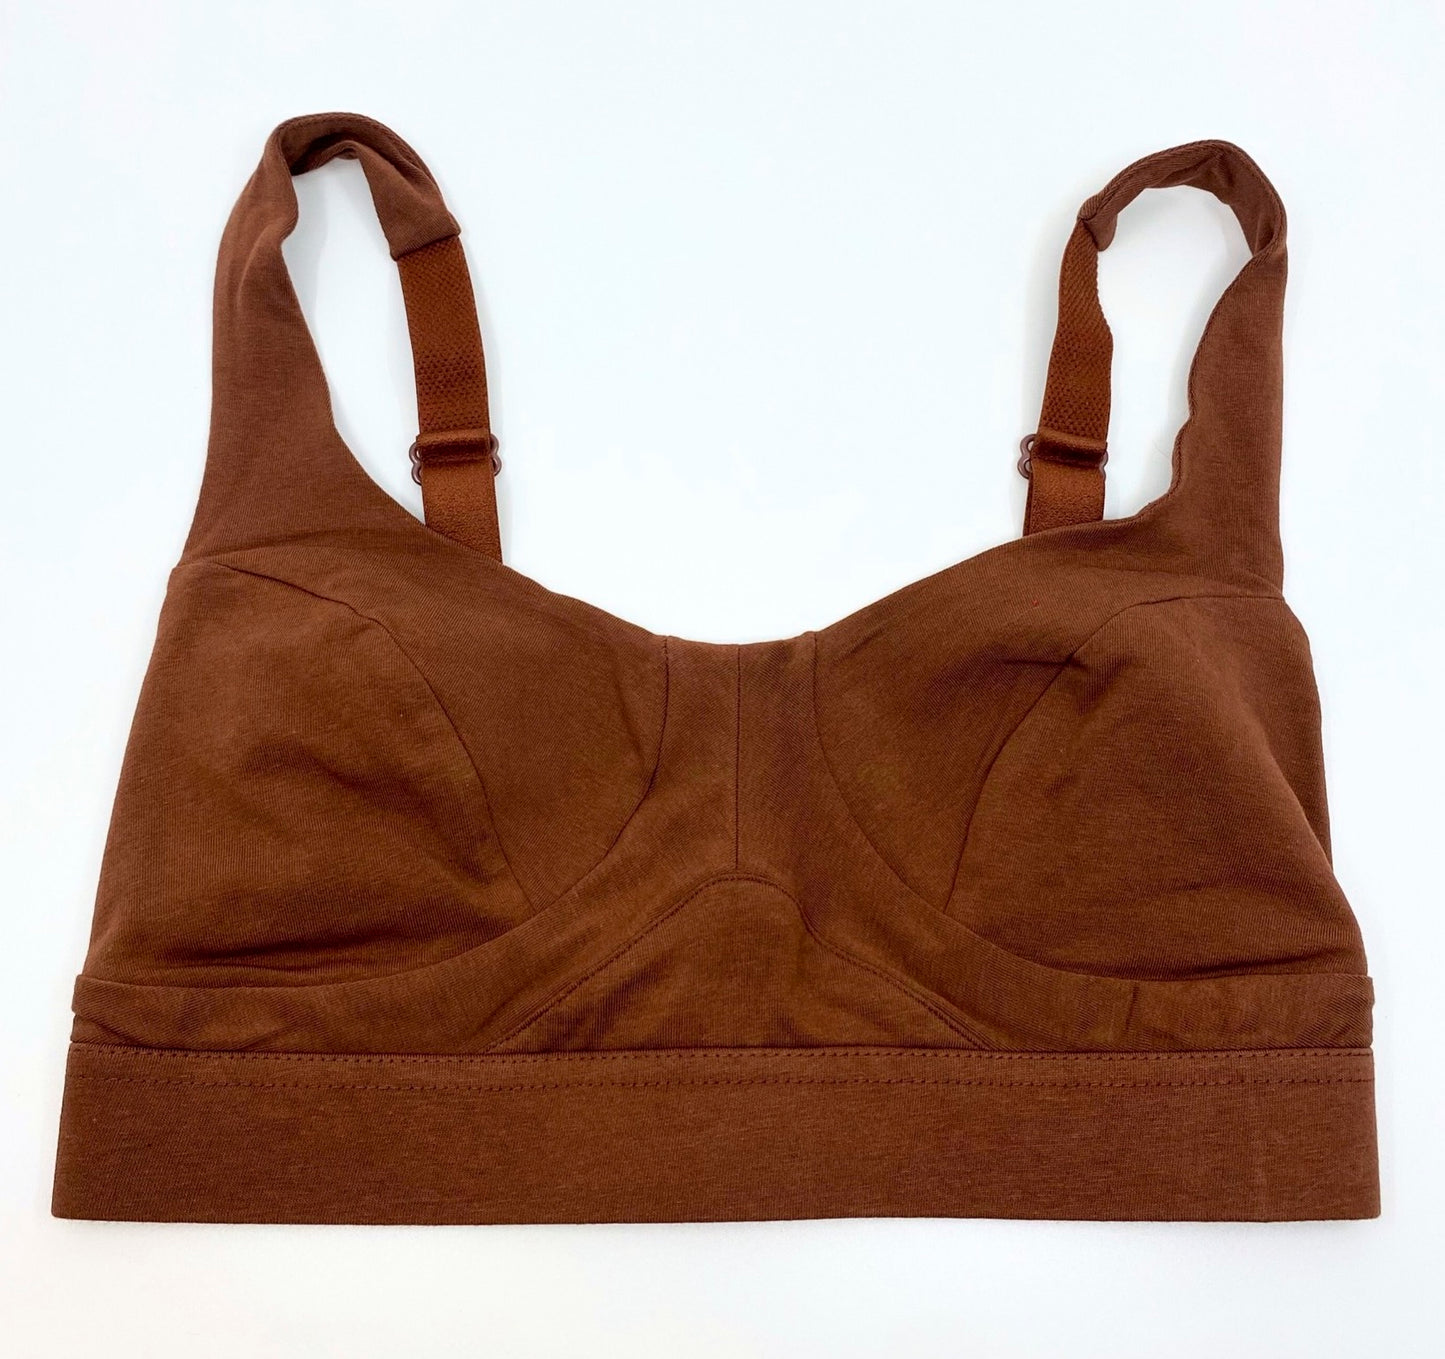 Women's organic cotton bra in chestnut - more supportive style